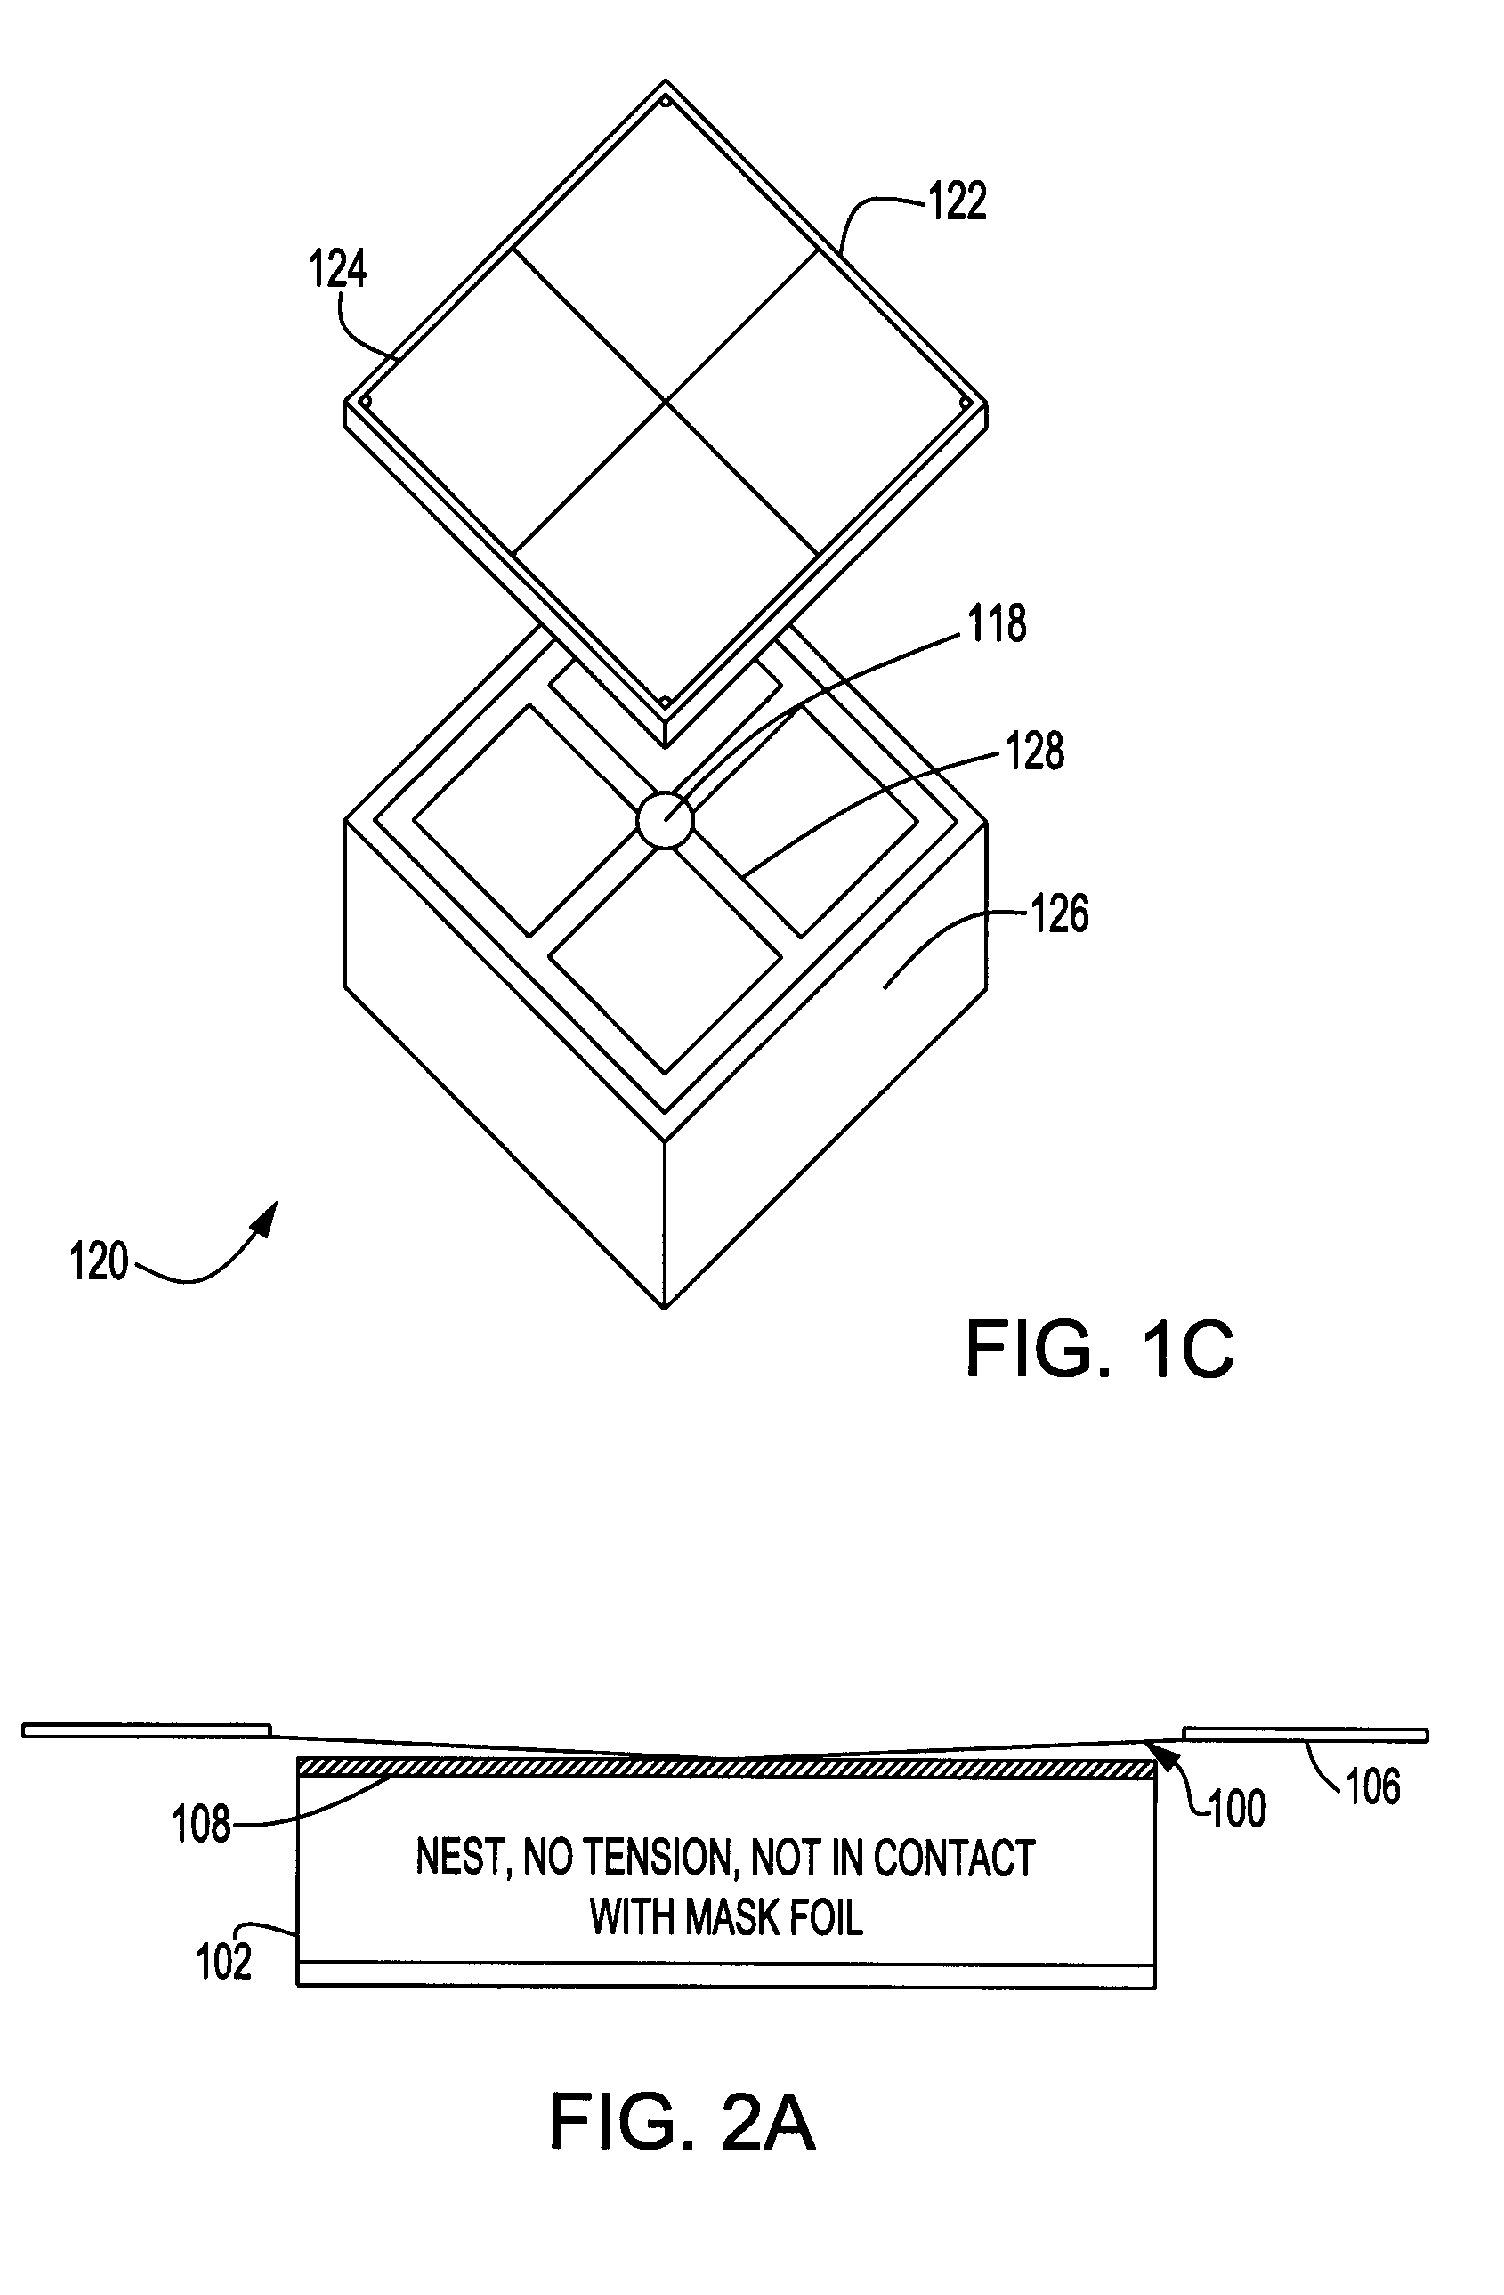 Screening nest, method of screening wiring layers in a multi-layer ceramic and cleaning the screening mask and mask cleaning station